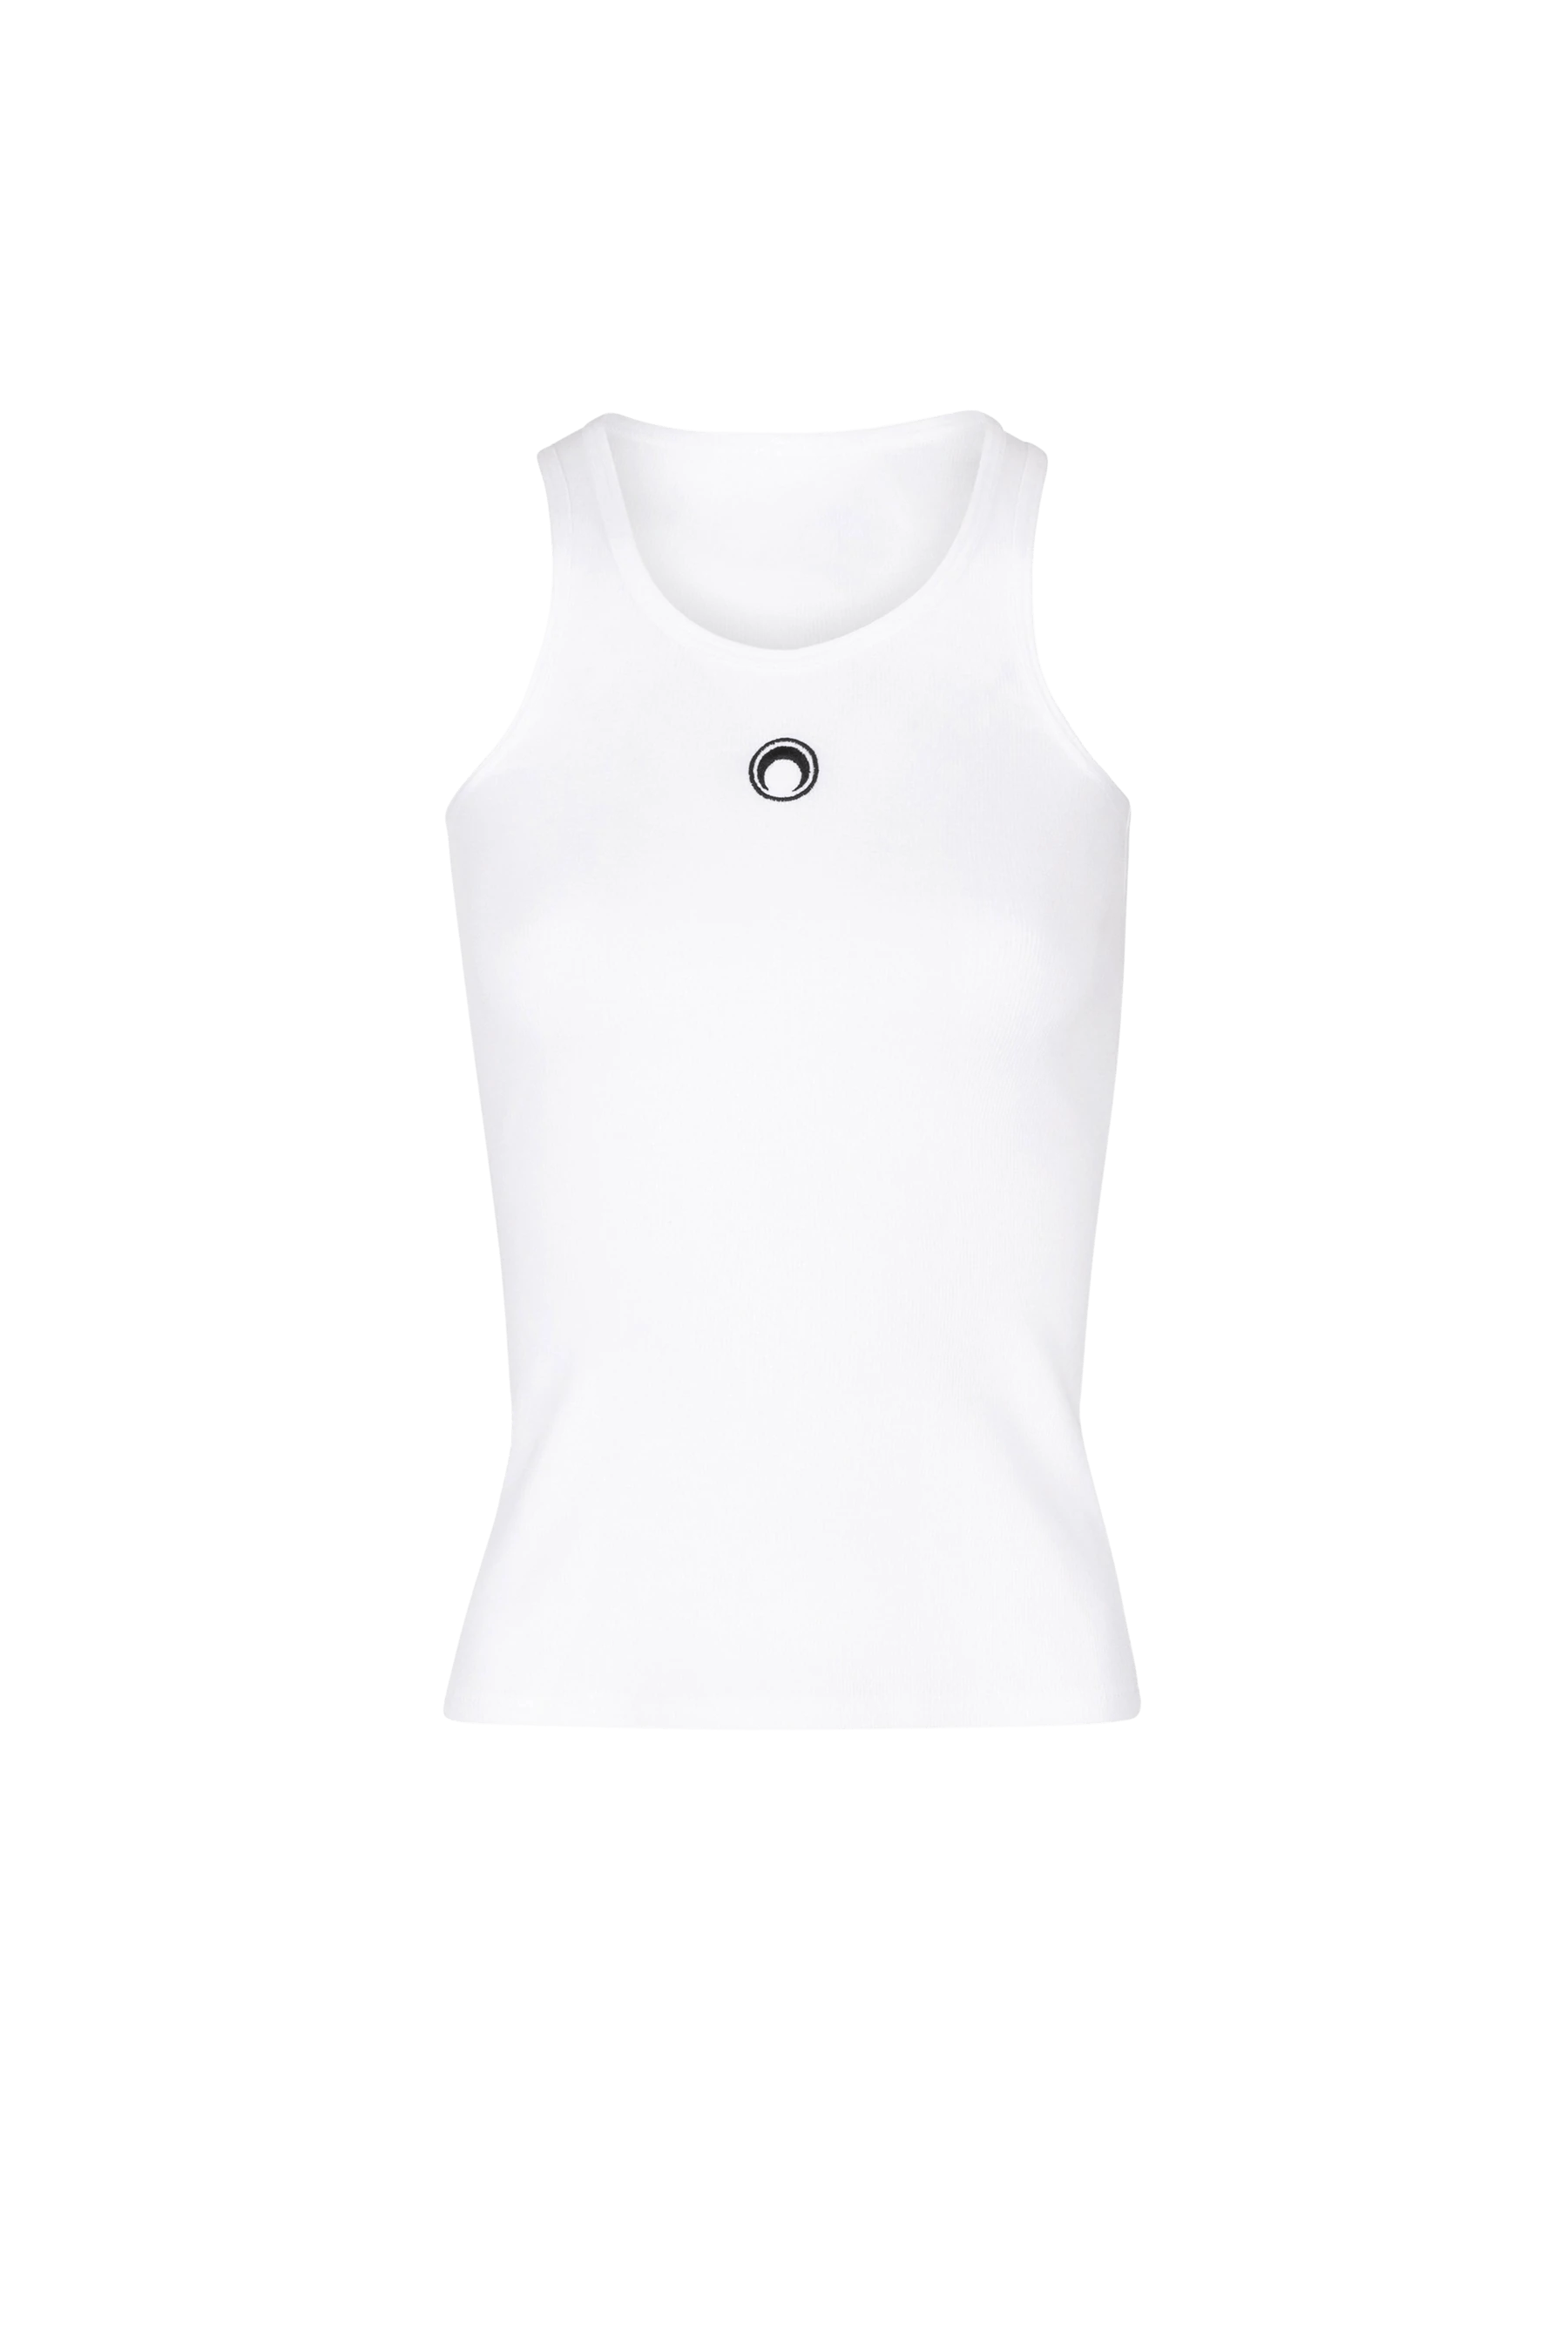 White Tank Tops Are Top Fashion Trend for Summer and Fall 2022